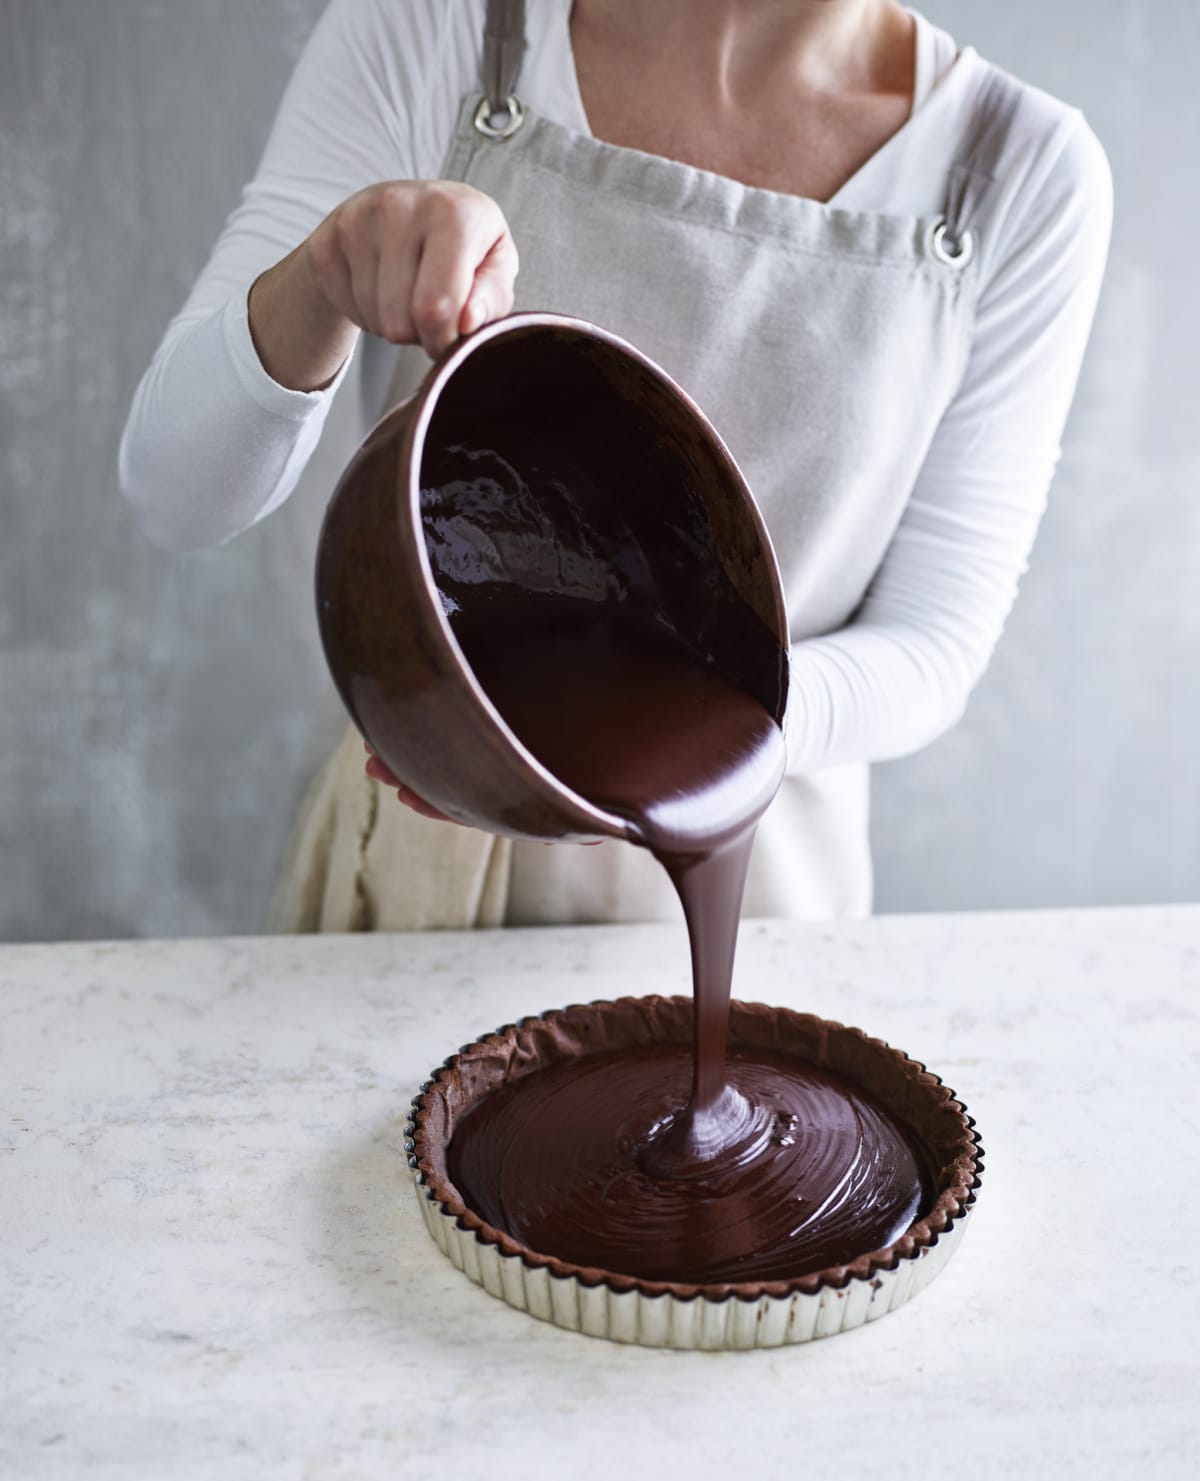 Woman pouring chocolate into a tart pan while preparing a Chocolate Ganache.